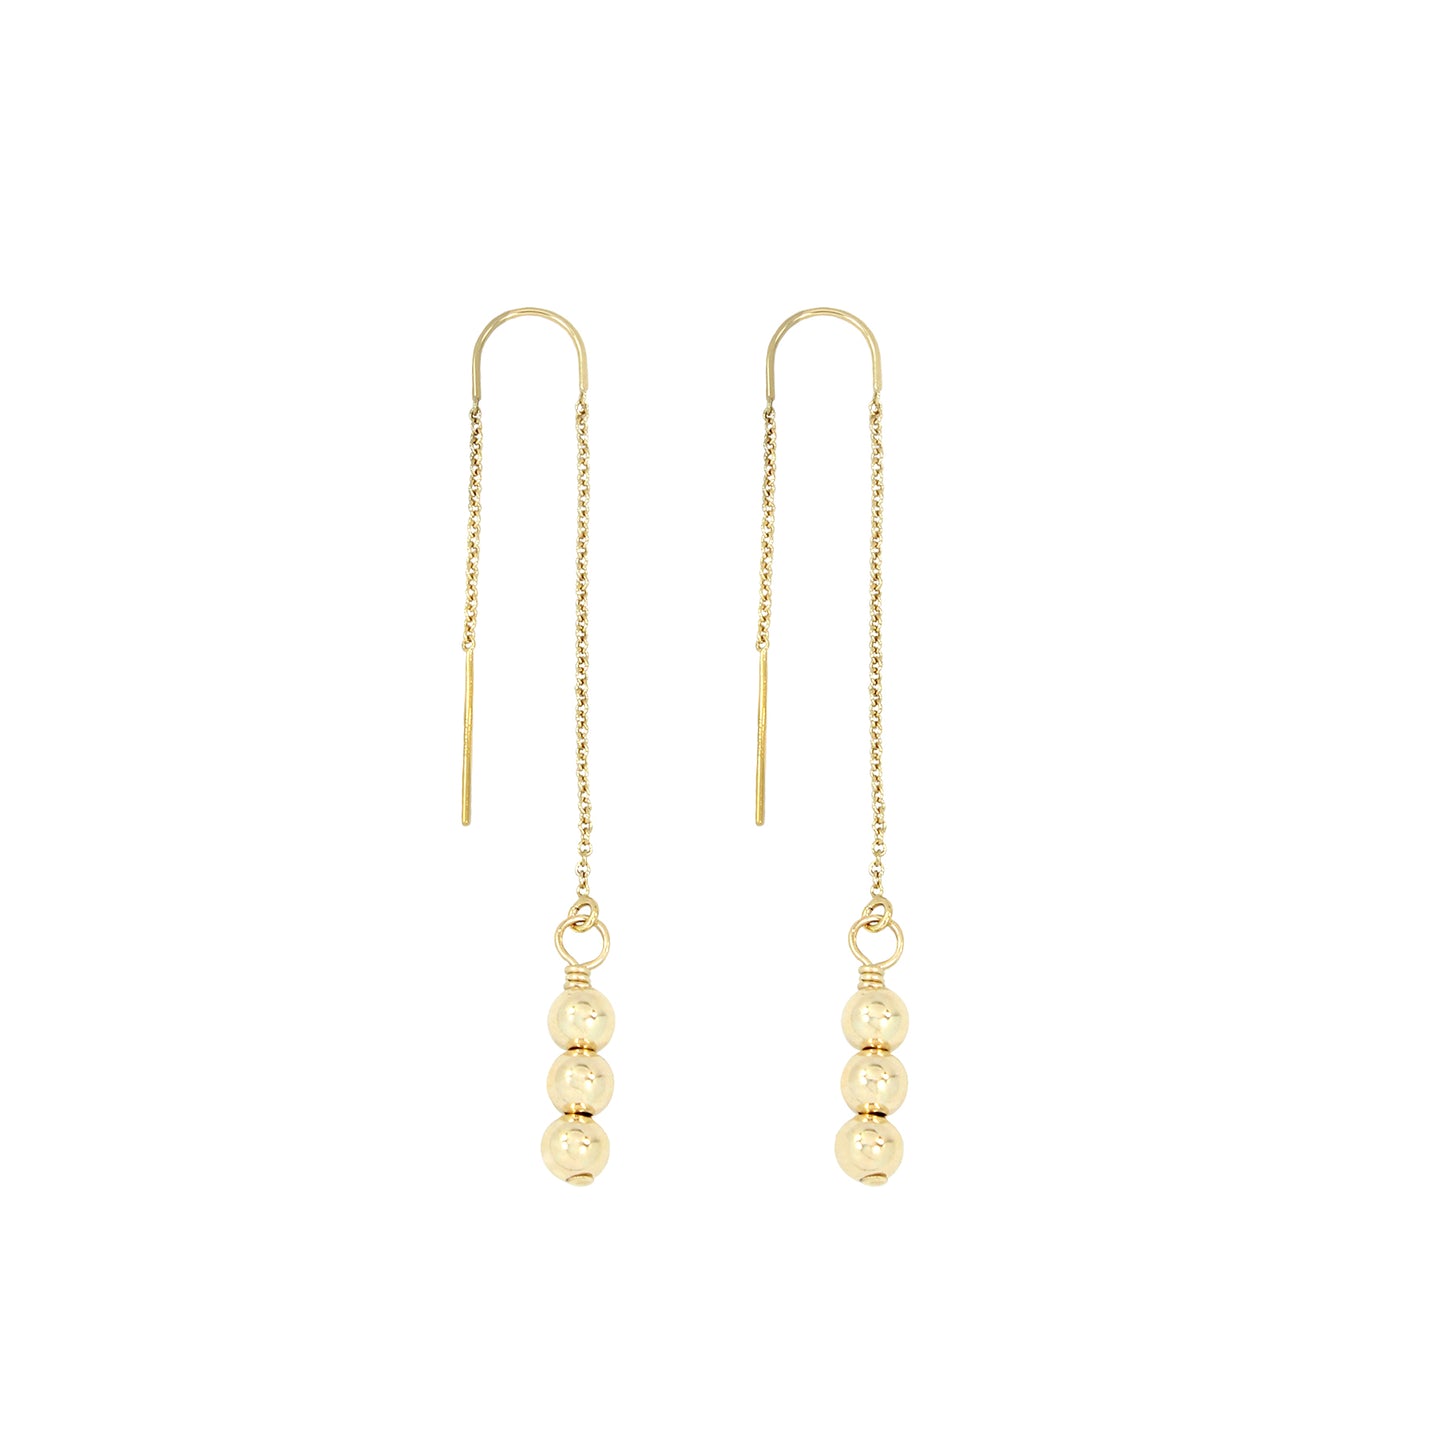 Load image into Gallery viewer, Gold filled beaded threader earrings. gold threaders. gold droplet threader earrings. Droplet threader earrings. 14k gold filled threaders. Gems by Laura.
